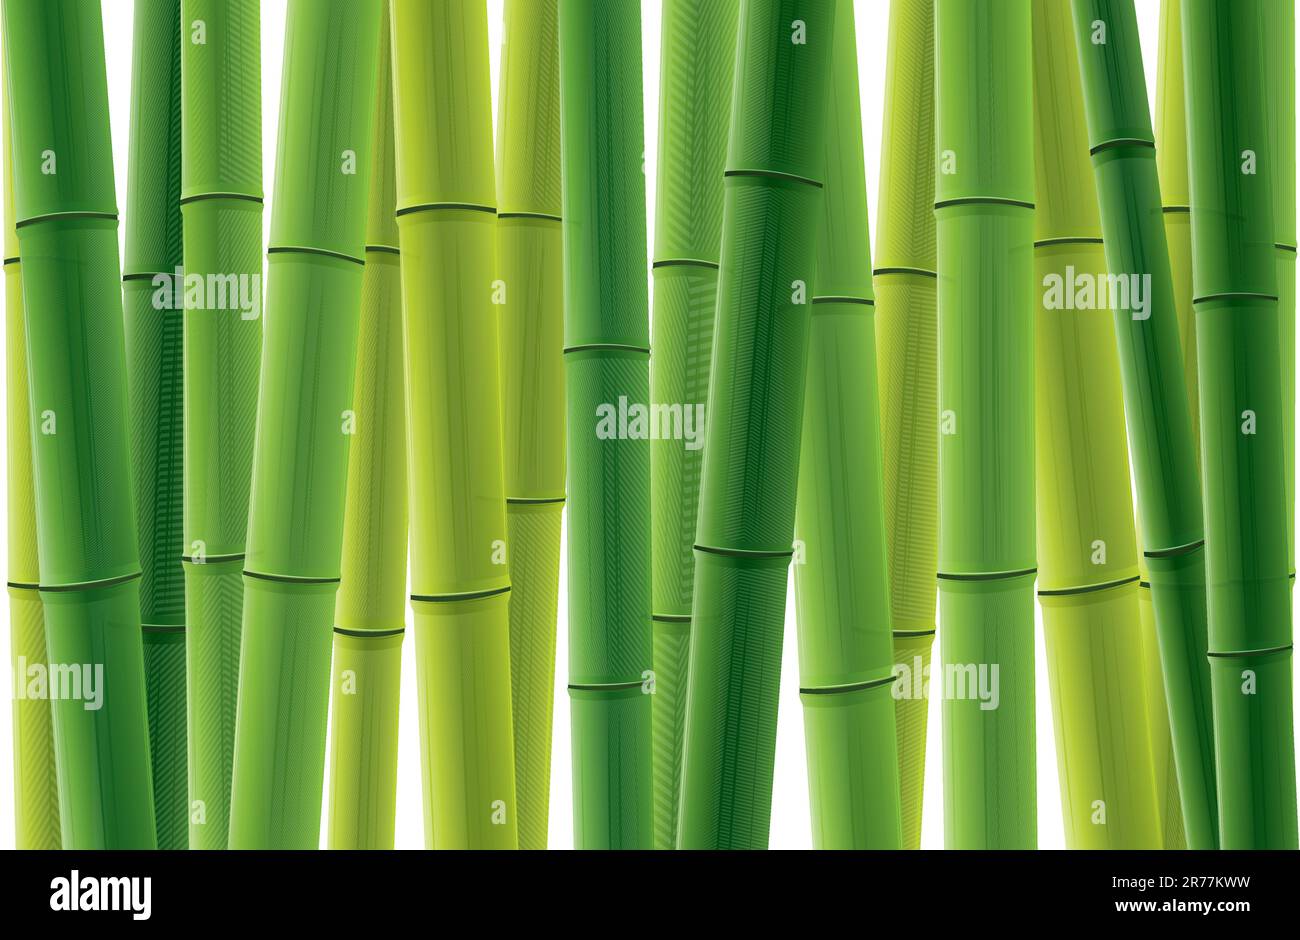 Fresh bamboo grove vector illustration.  Only applied in gradient. Stock Vector